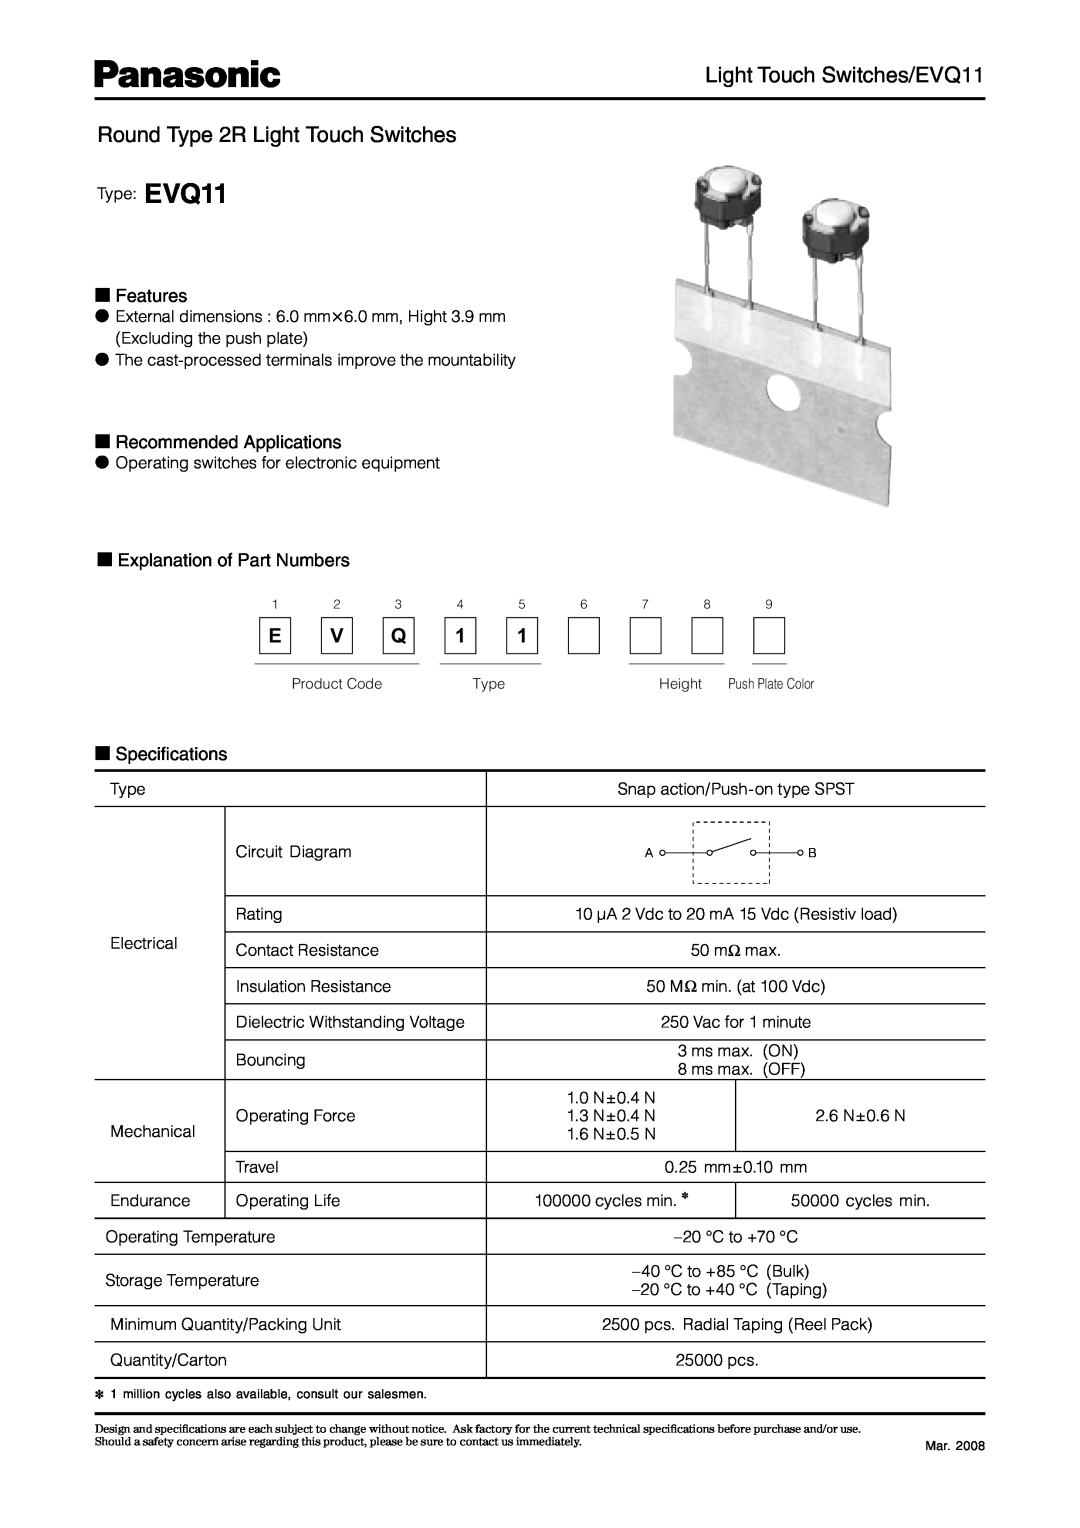 Panasonic specifications Light Touch Switches/EVQ11 Round Type 2R Light Touch Switches, Features, Speciﬁcations 